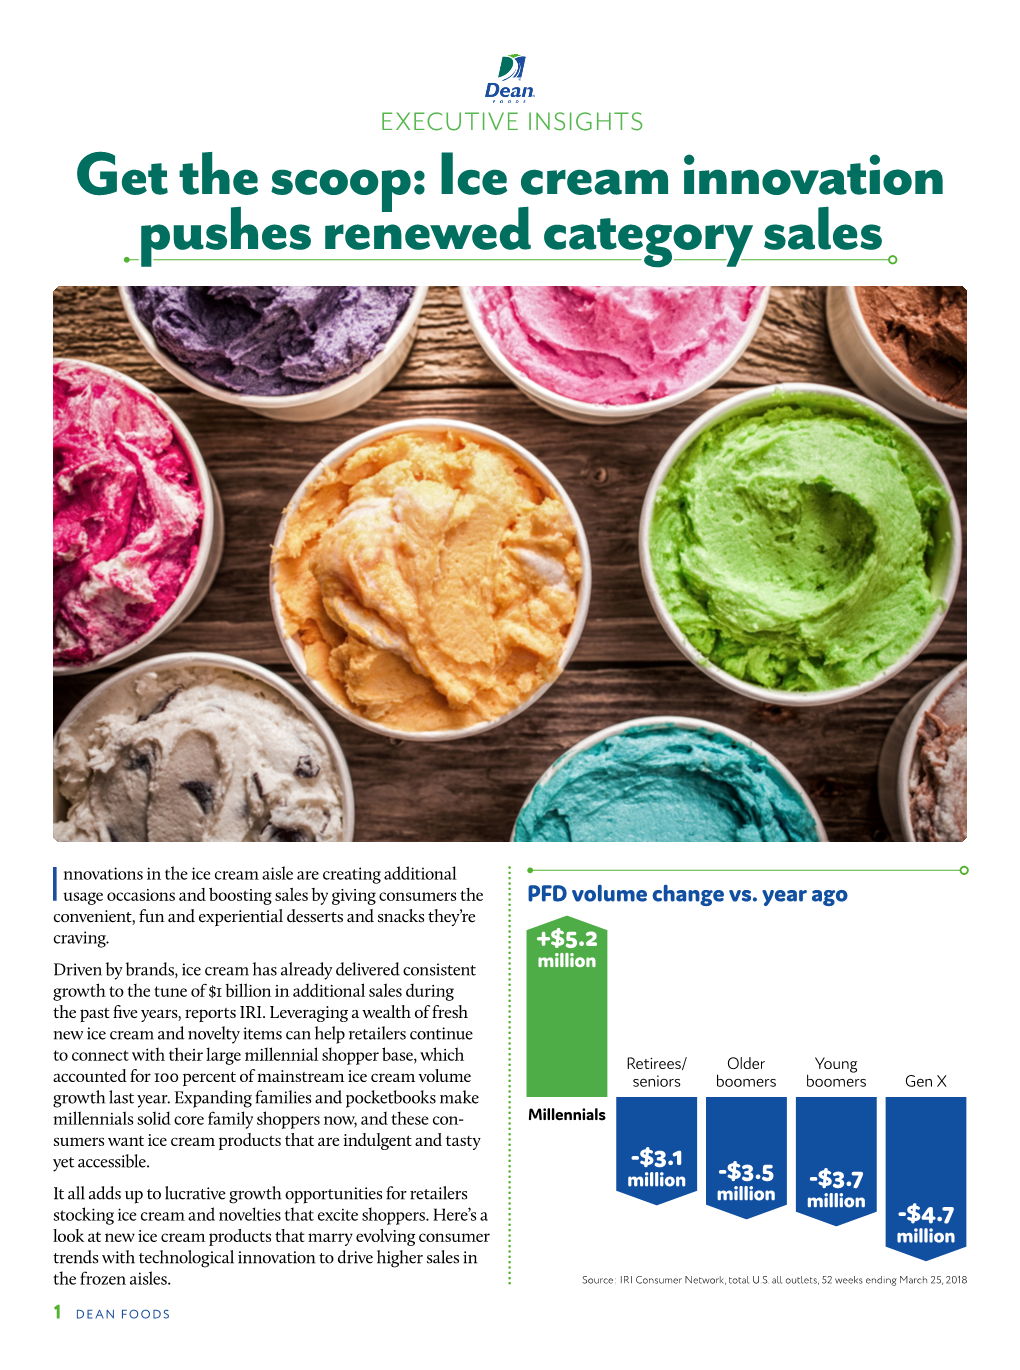 Get the Scoop: Ice Cream Innovation Pushes Renewed Category Sales